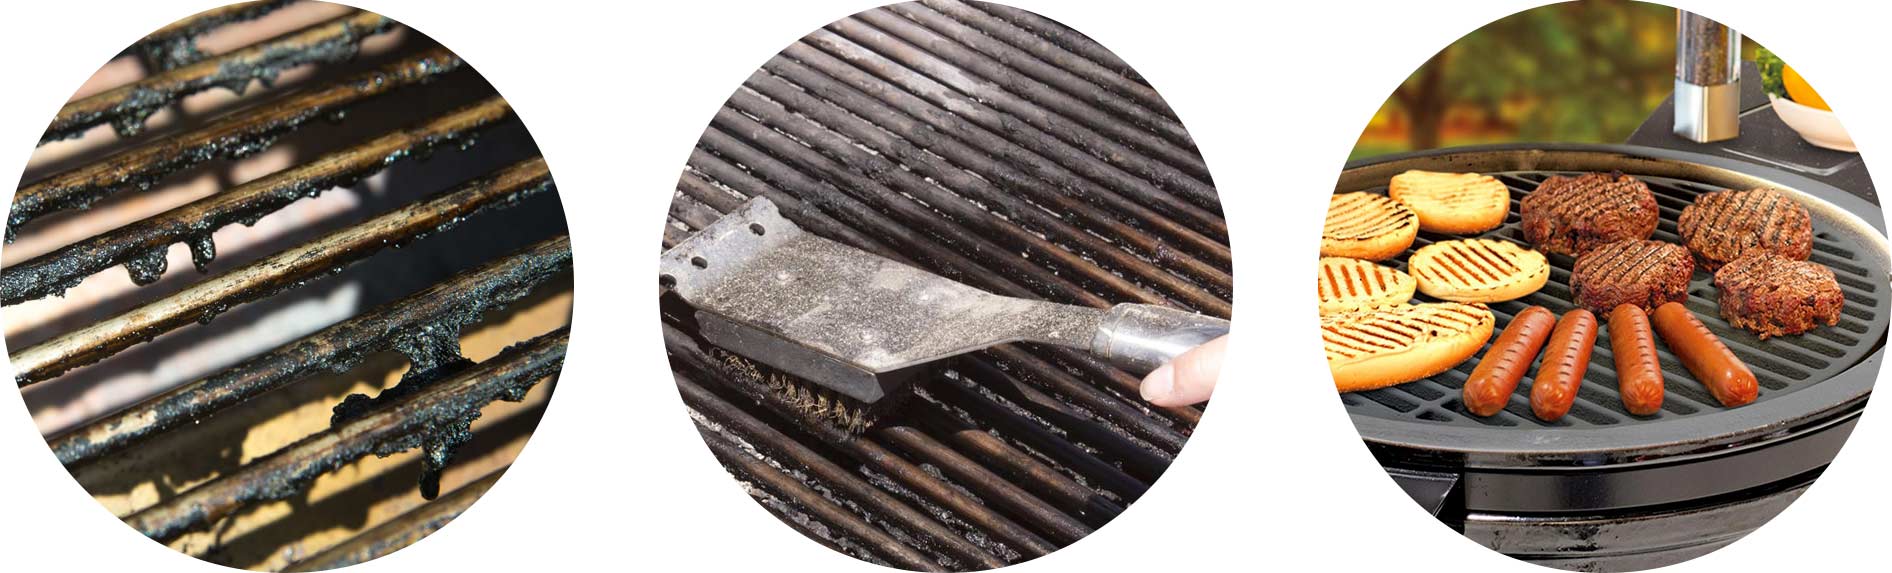 Beginner's Guide to Grilling - How to Clean